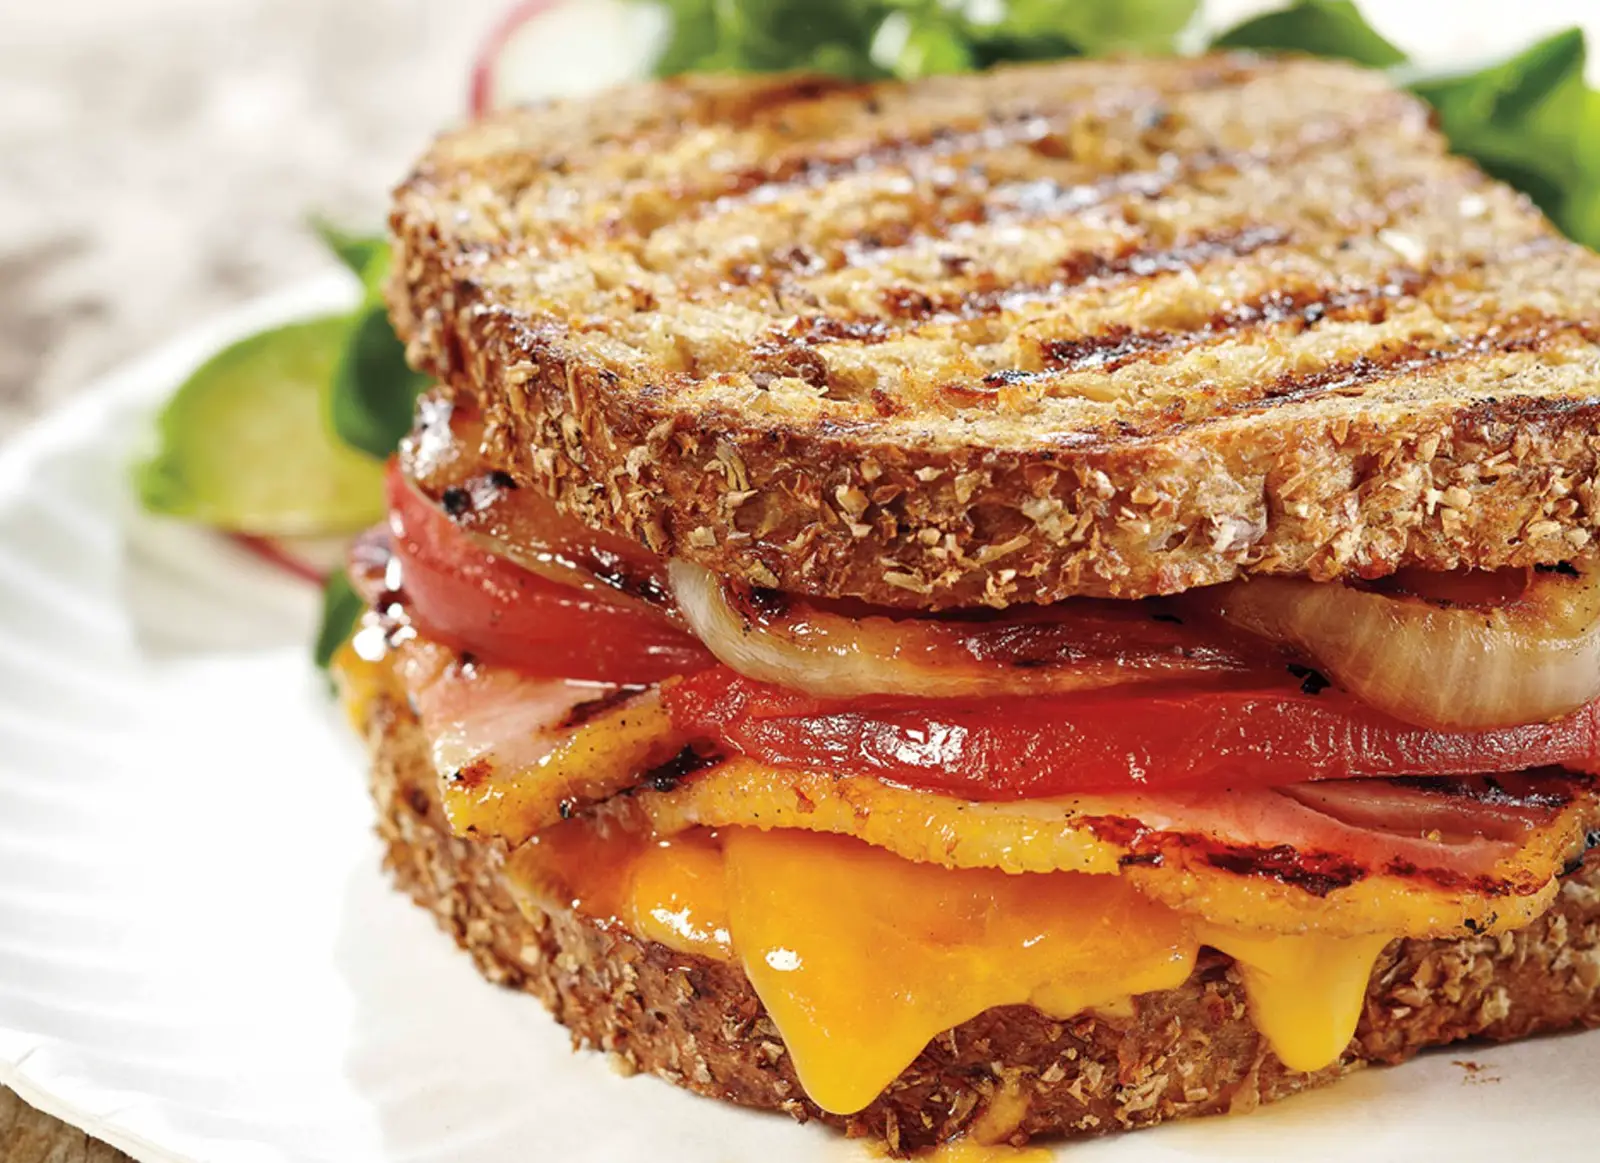 Bacon grilled cheese sandwich